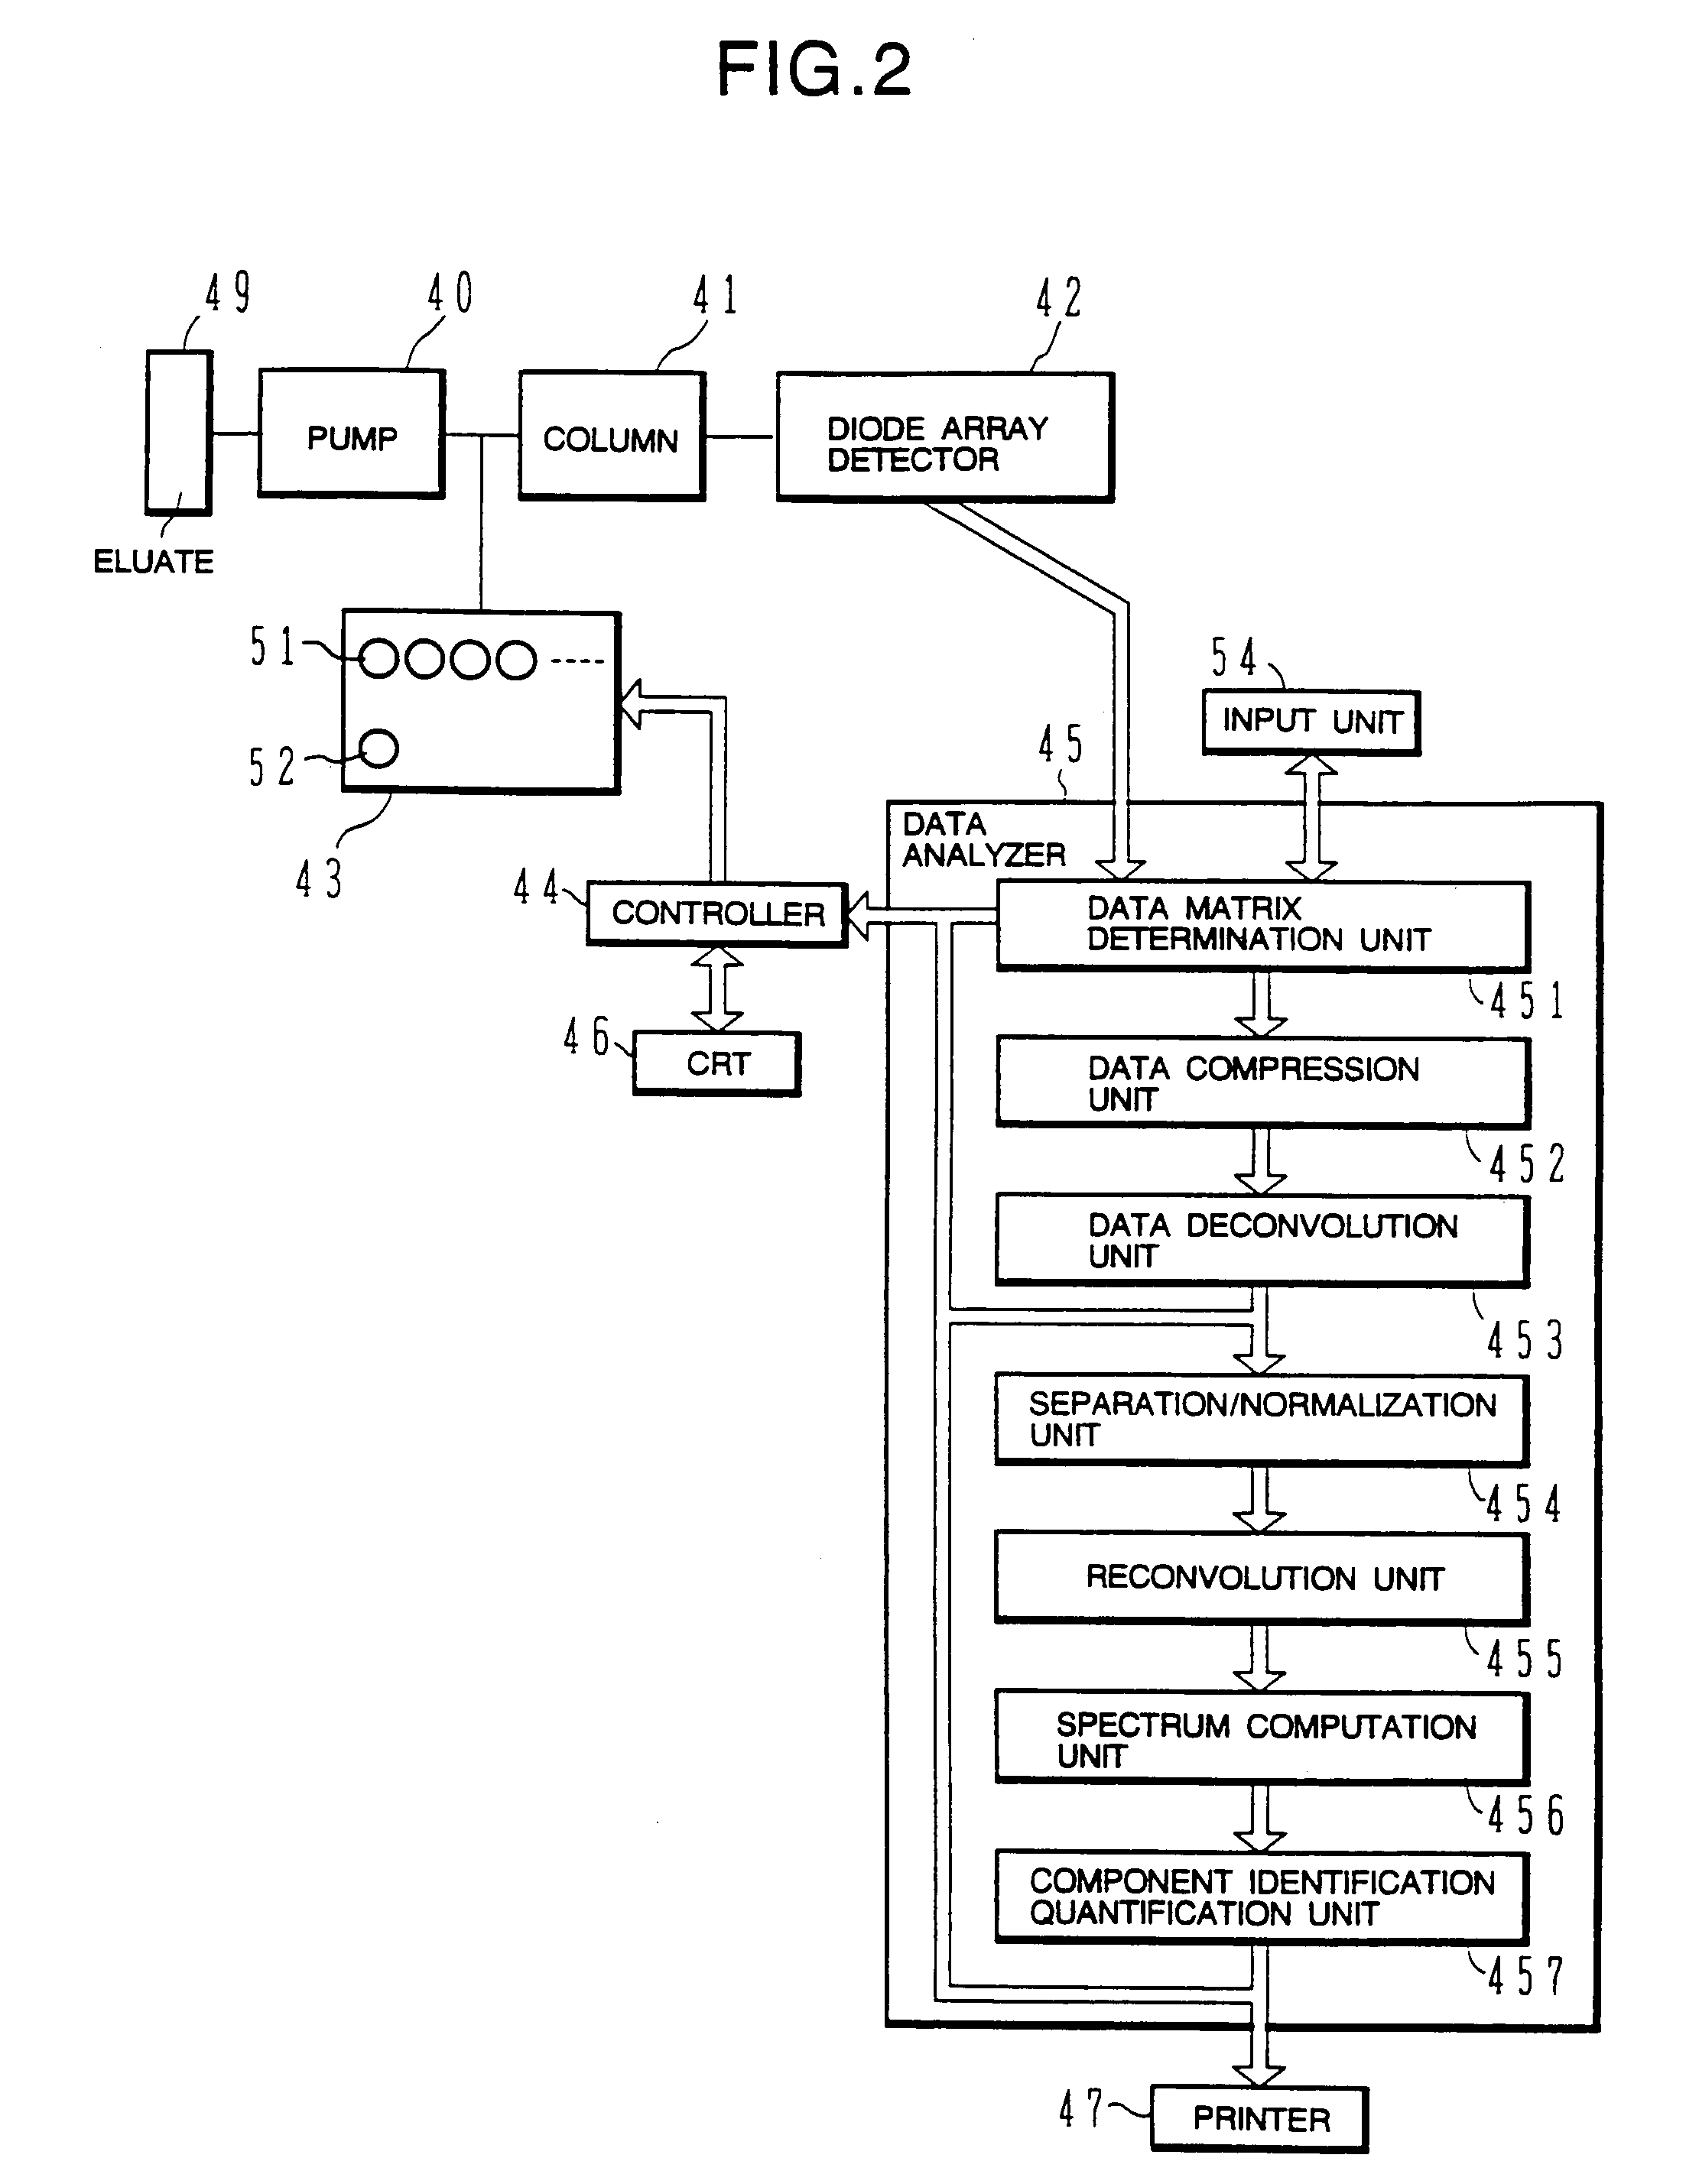 Method and apparatus for analyzing multi-channel chromatogram